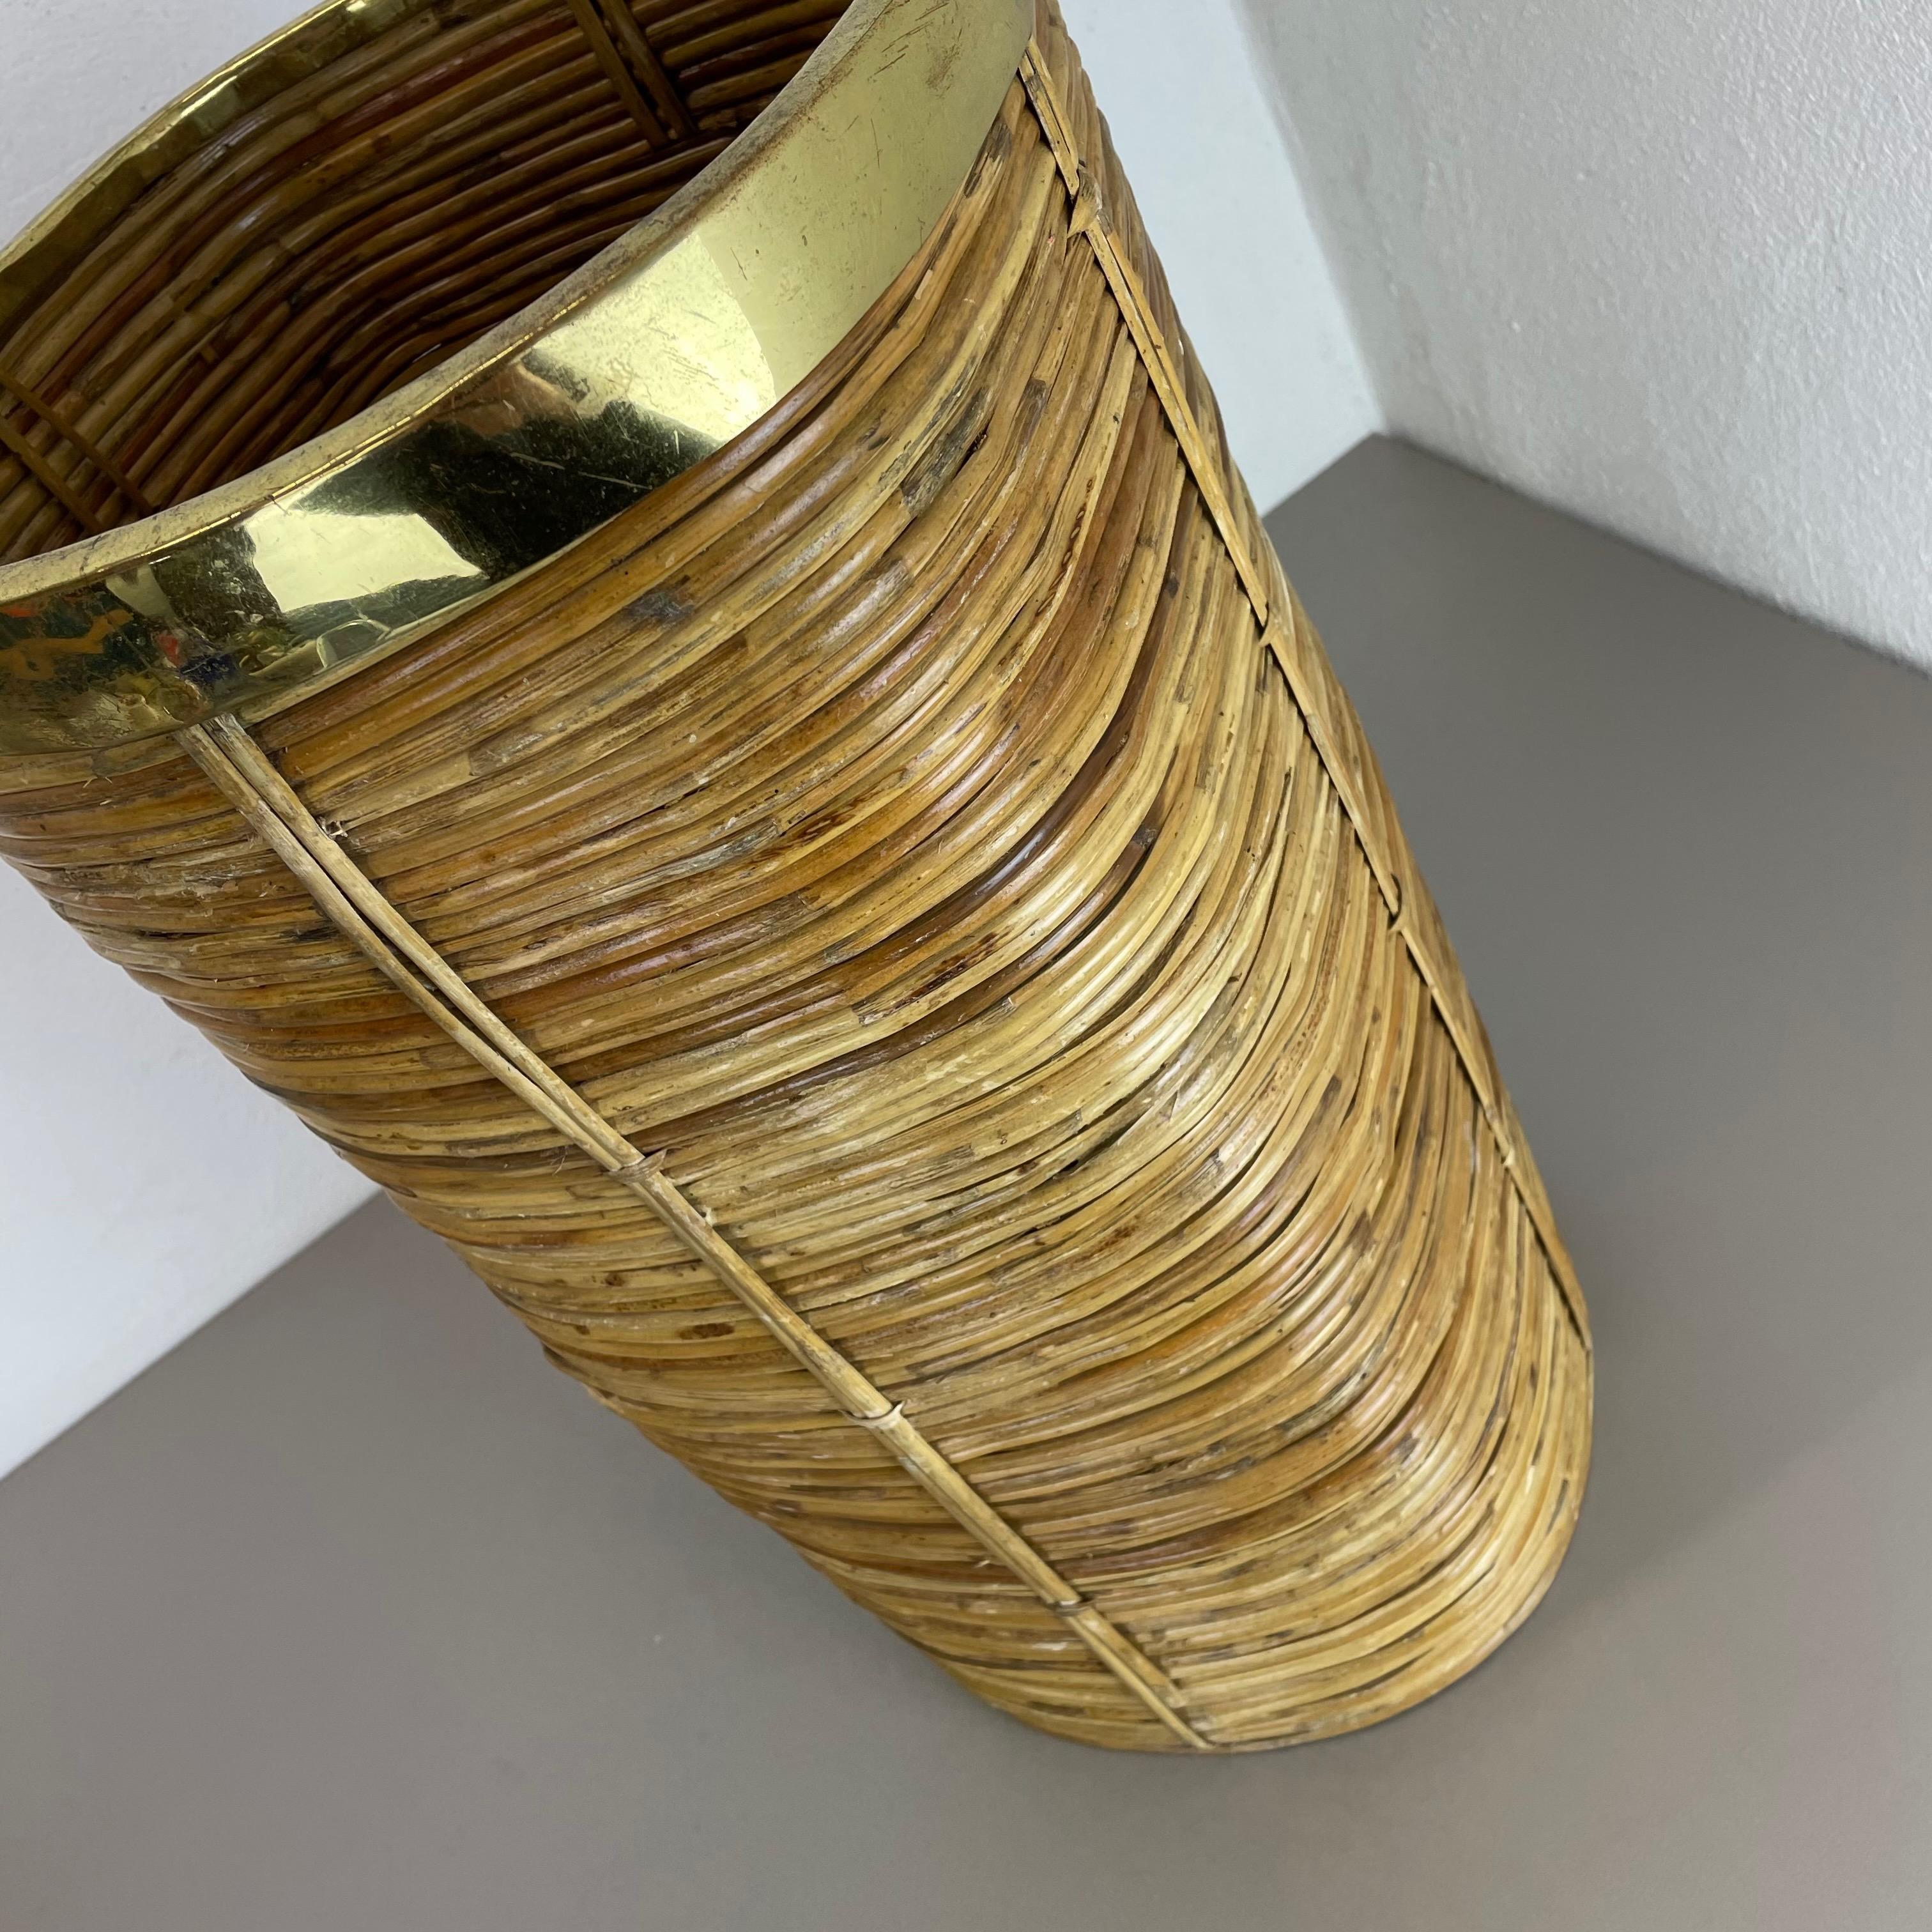 Aubock Style Mid-Century Rattan and Brass Bauhaus Waste Paper Bin, France, 1960s For Sale 9